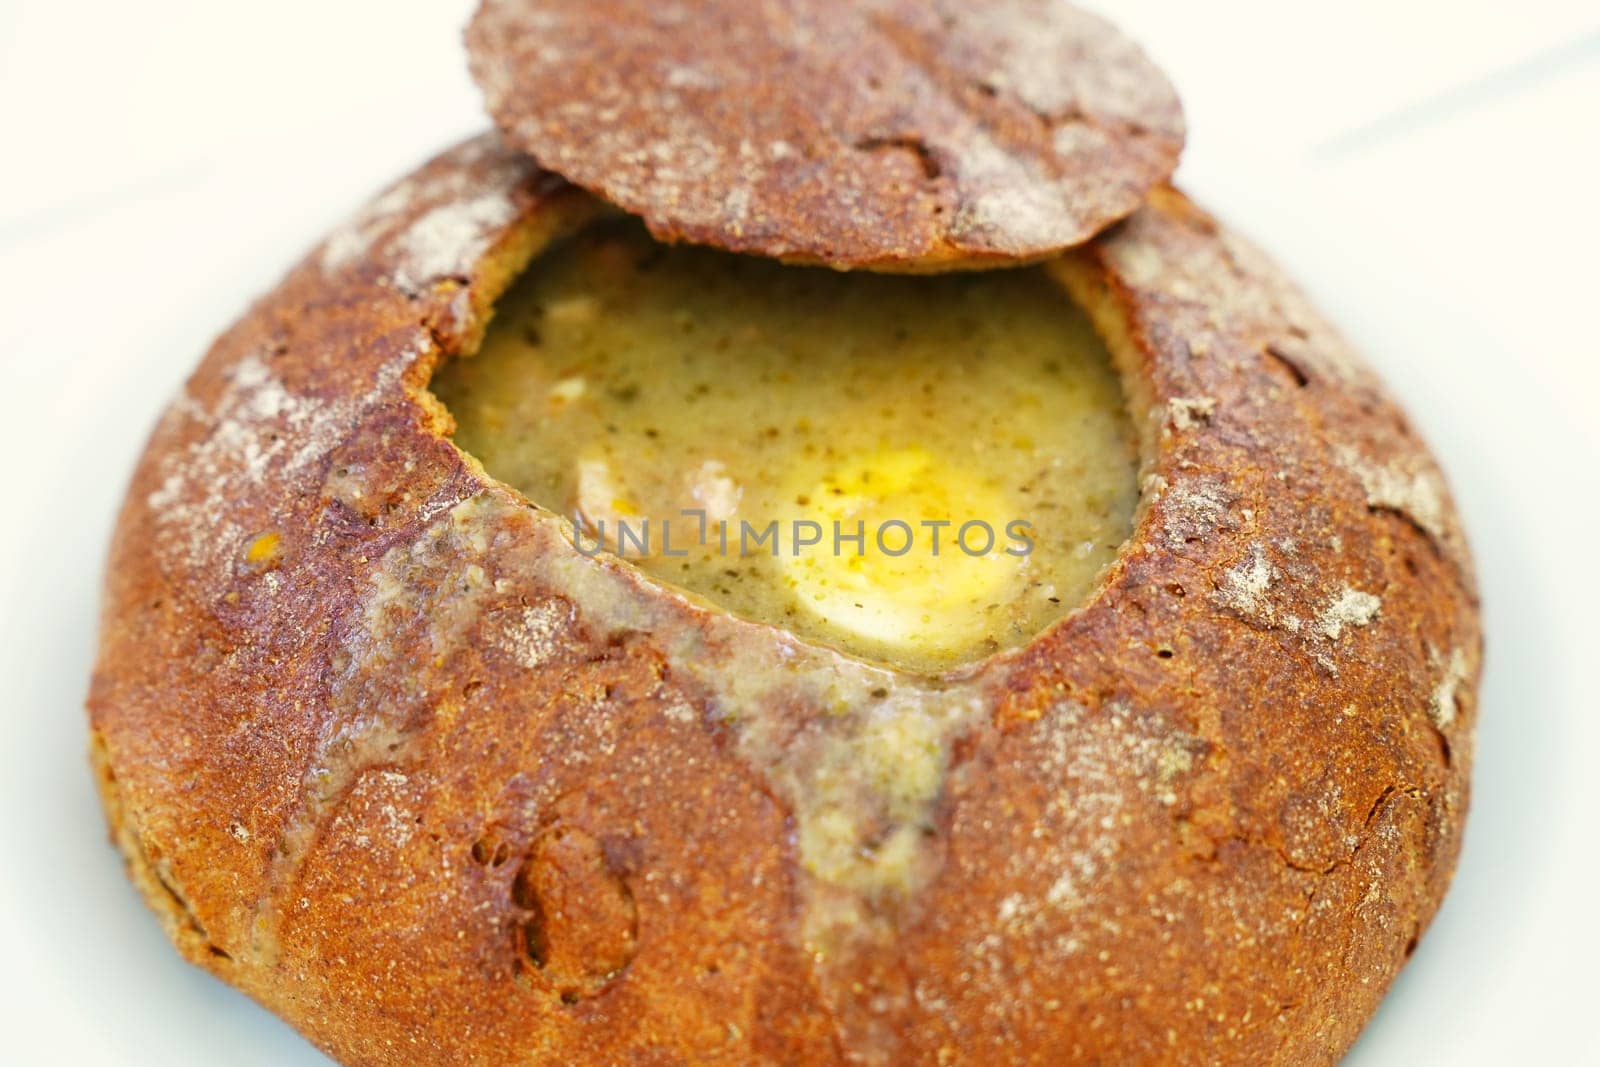 Traditional Polish National Dish: Delicious Soup Served in a Freshly Baked Bread Loaf by PhotoTime